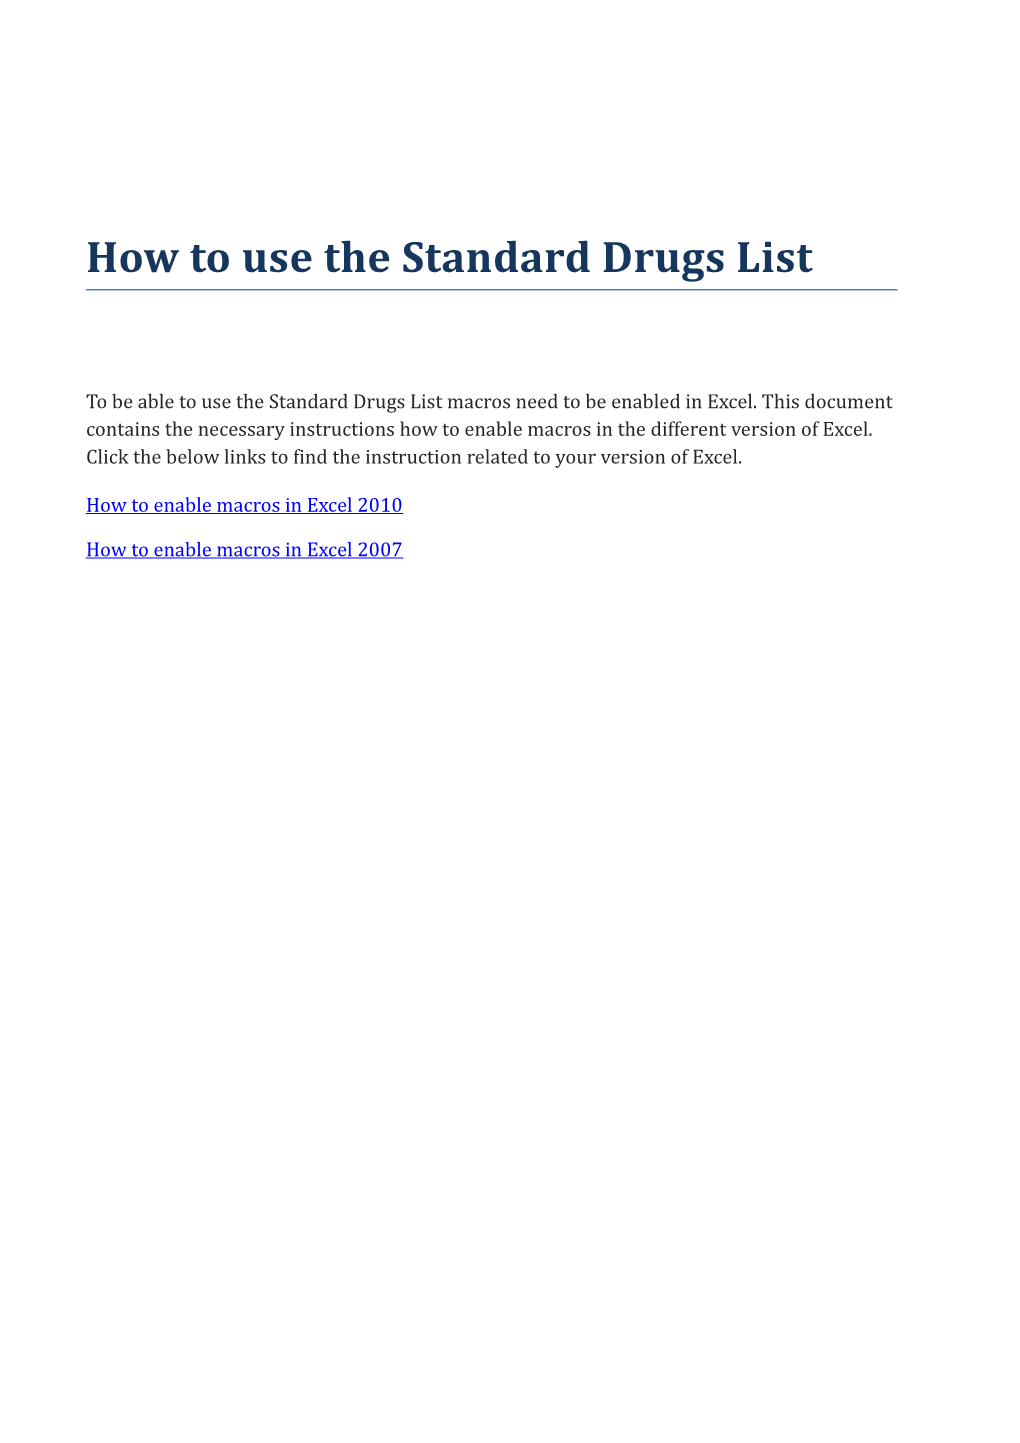 How to Use the Standard Drugs List